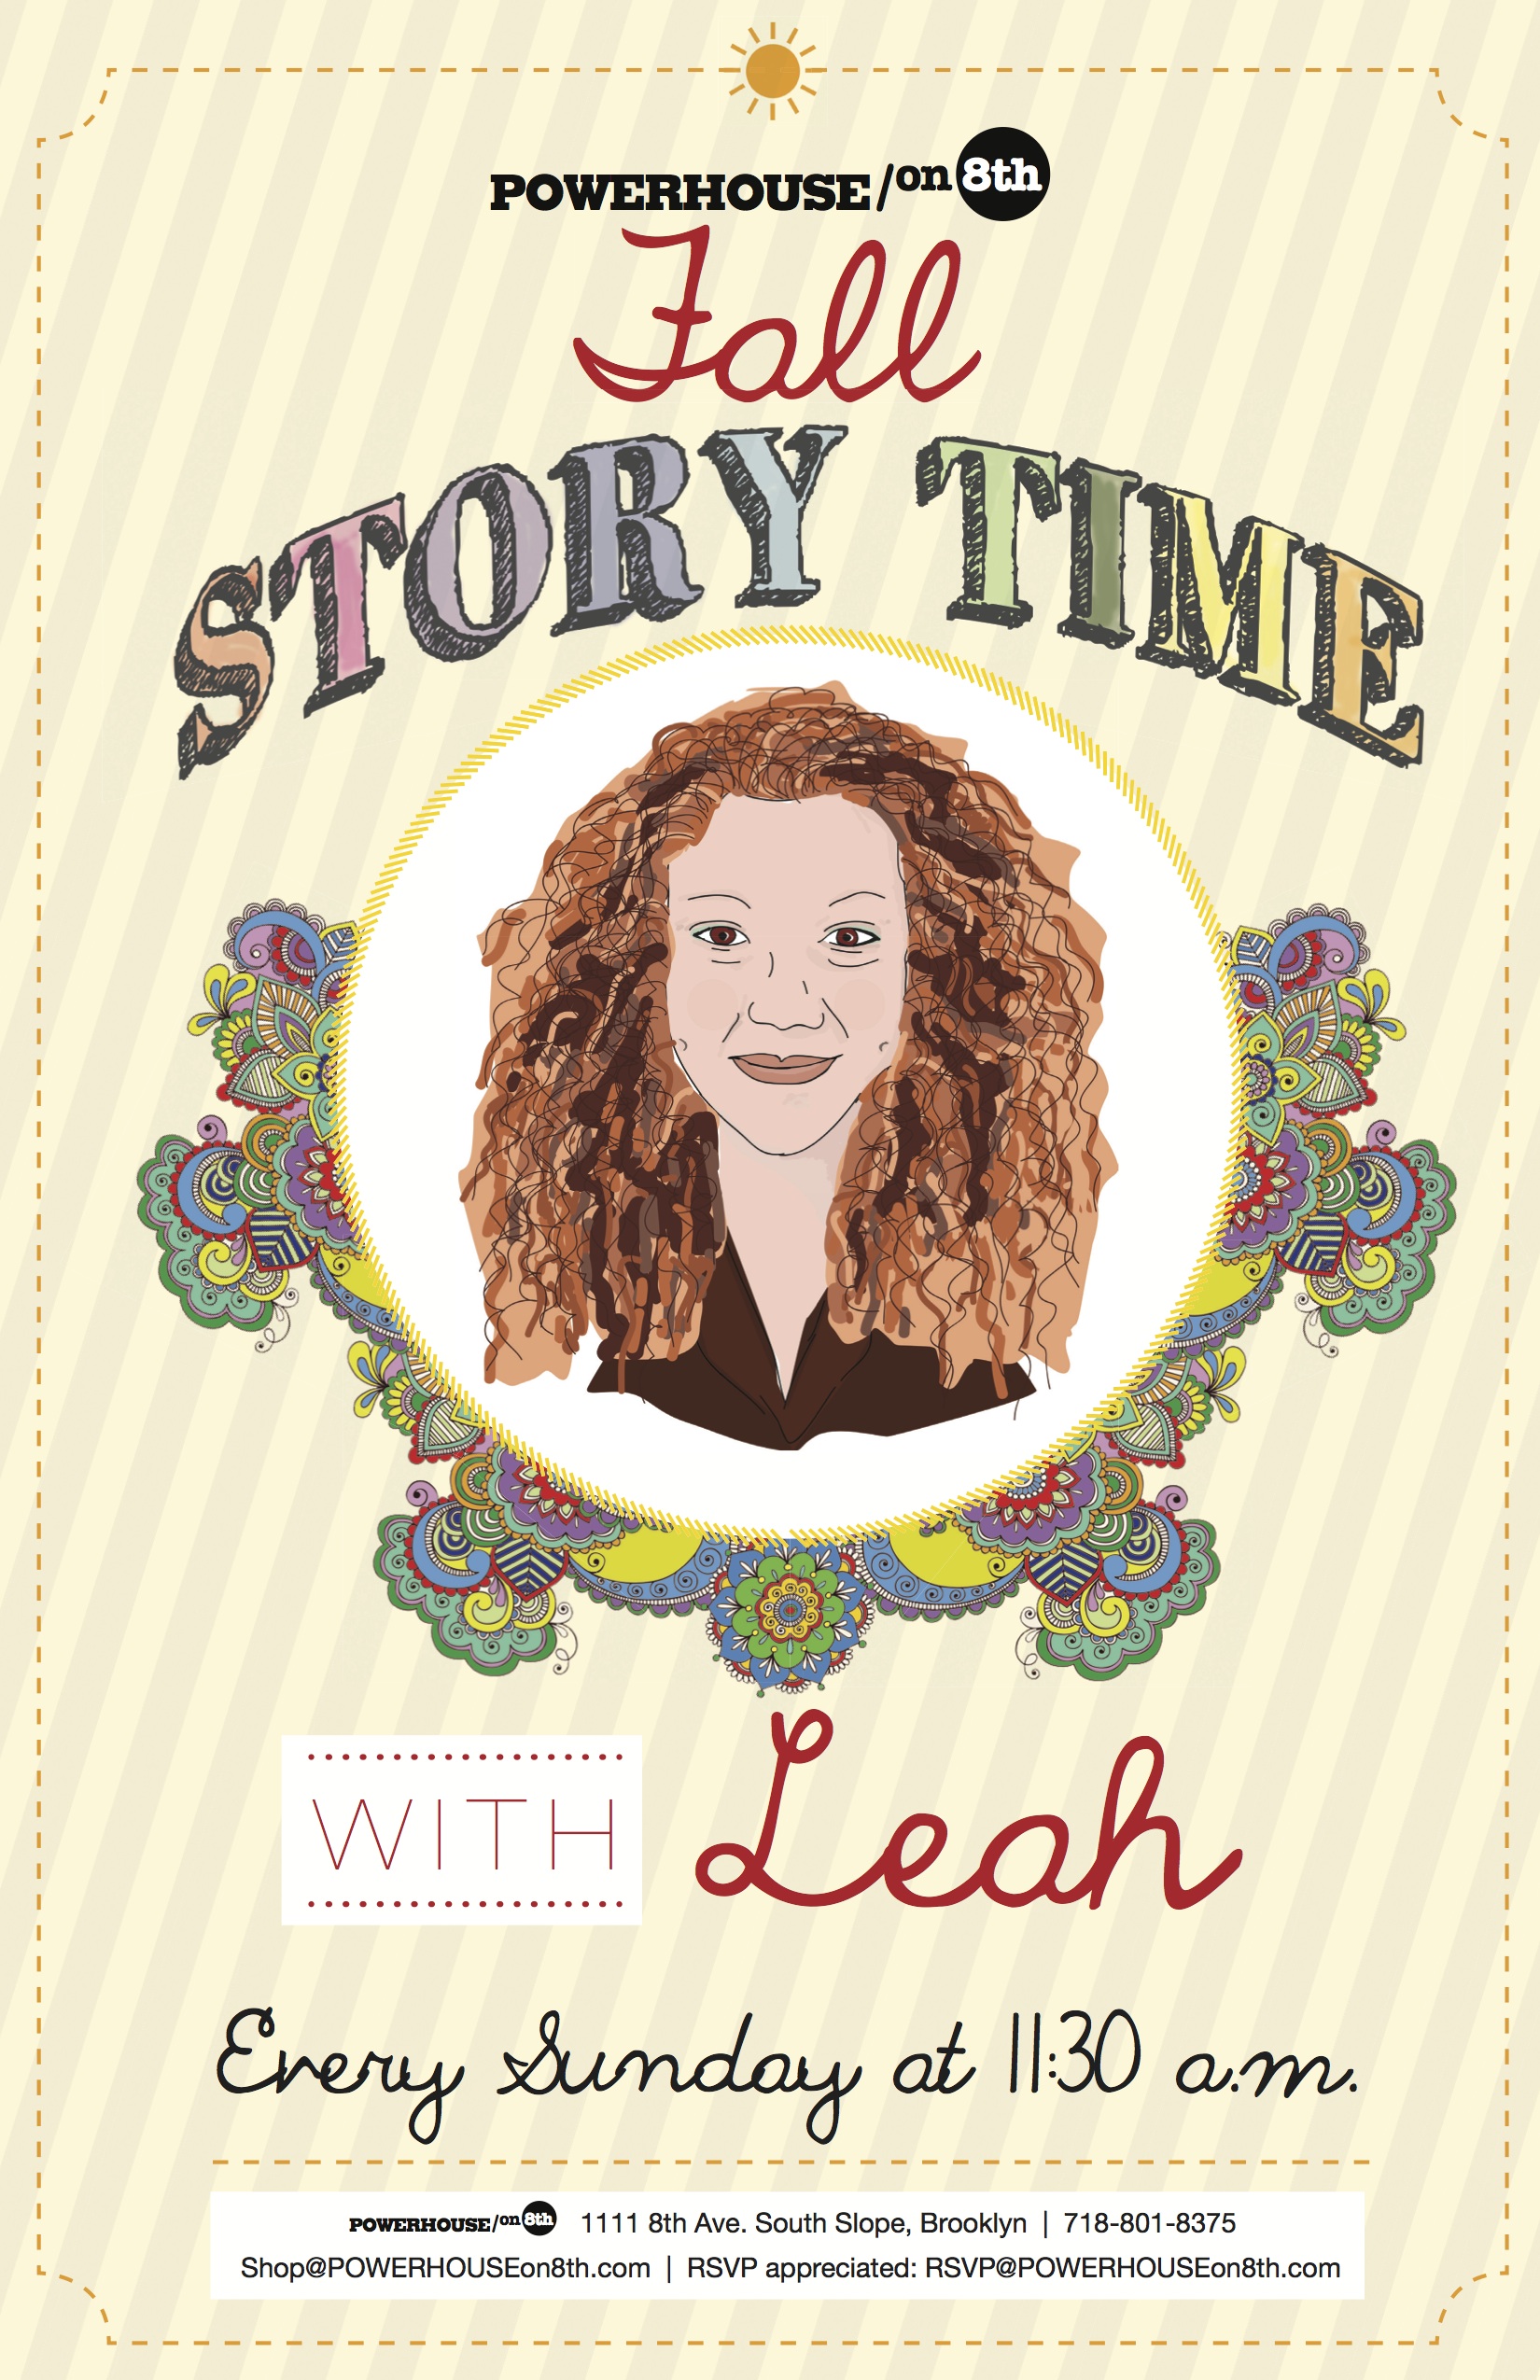 Story Time with Leah